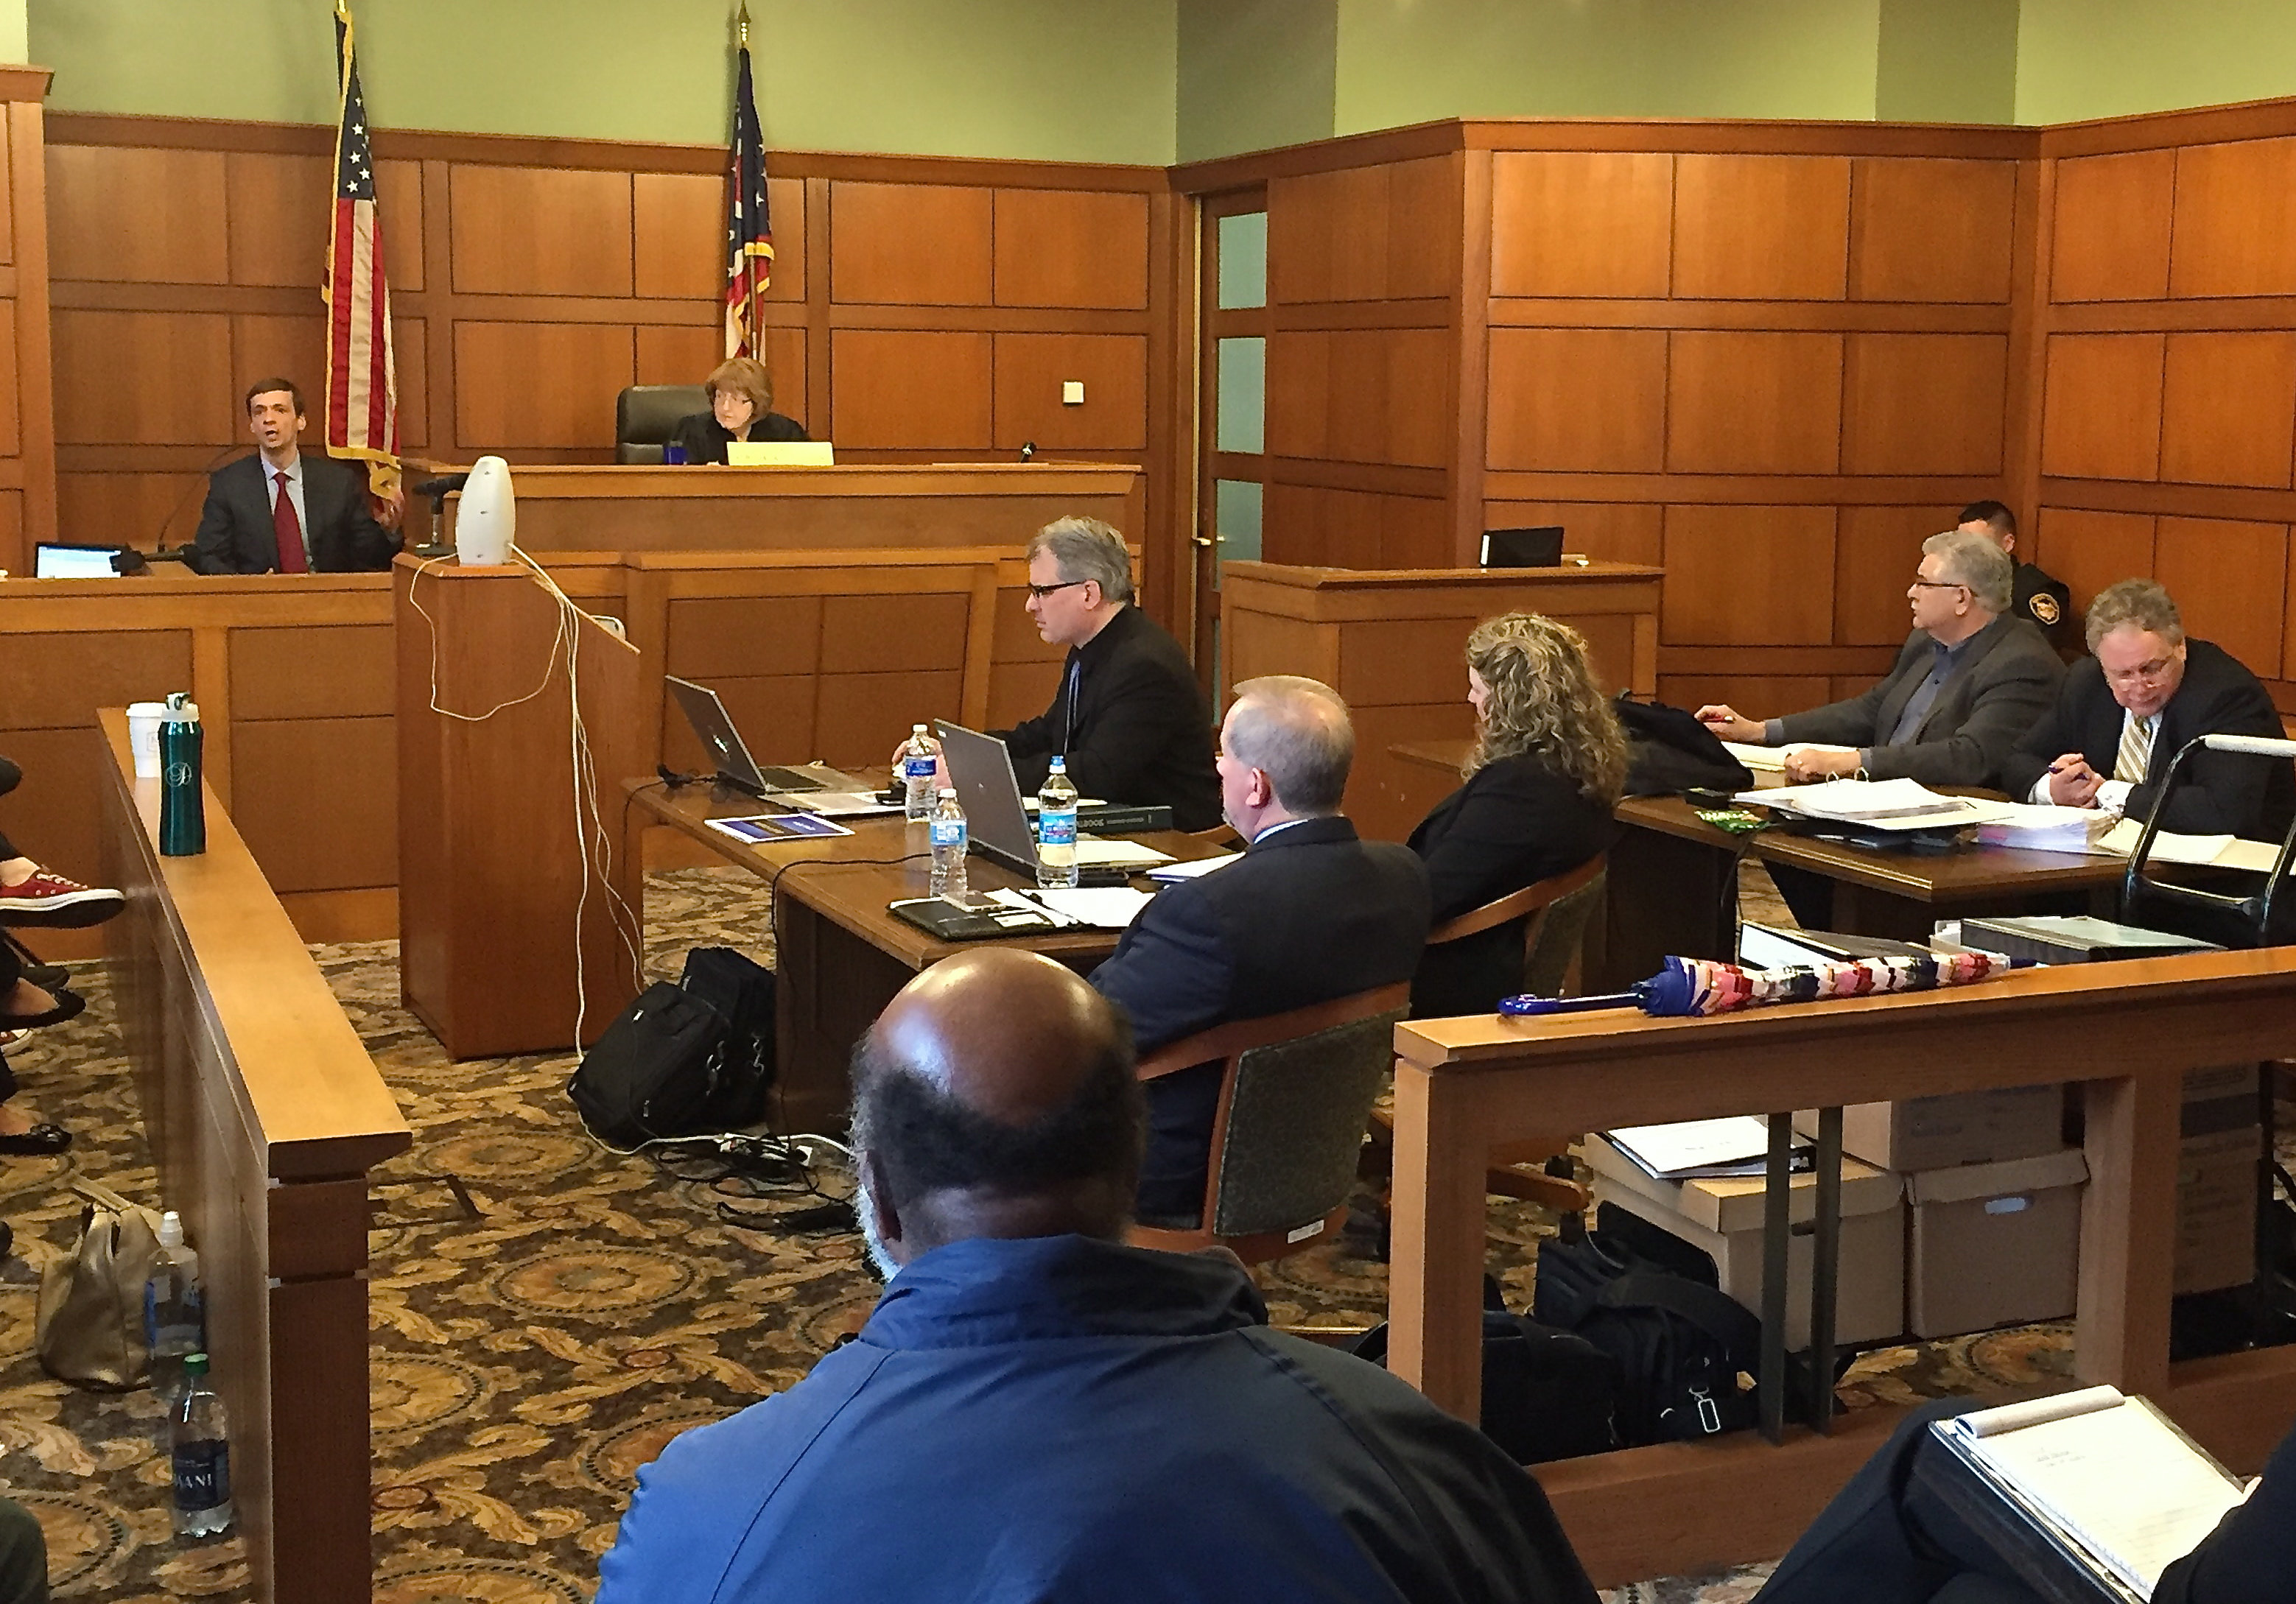 Deane Hassman, agent with the Youngstown office of the FBI, has taken the stand as the first witness in the former Niles mayor Ralph Infante corruption trial.